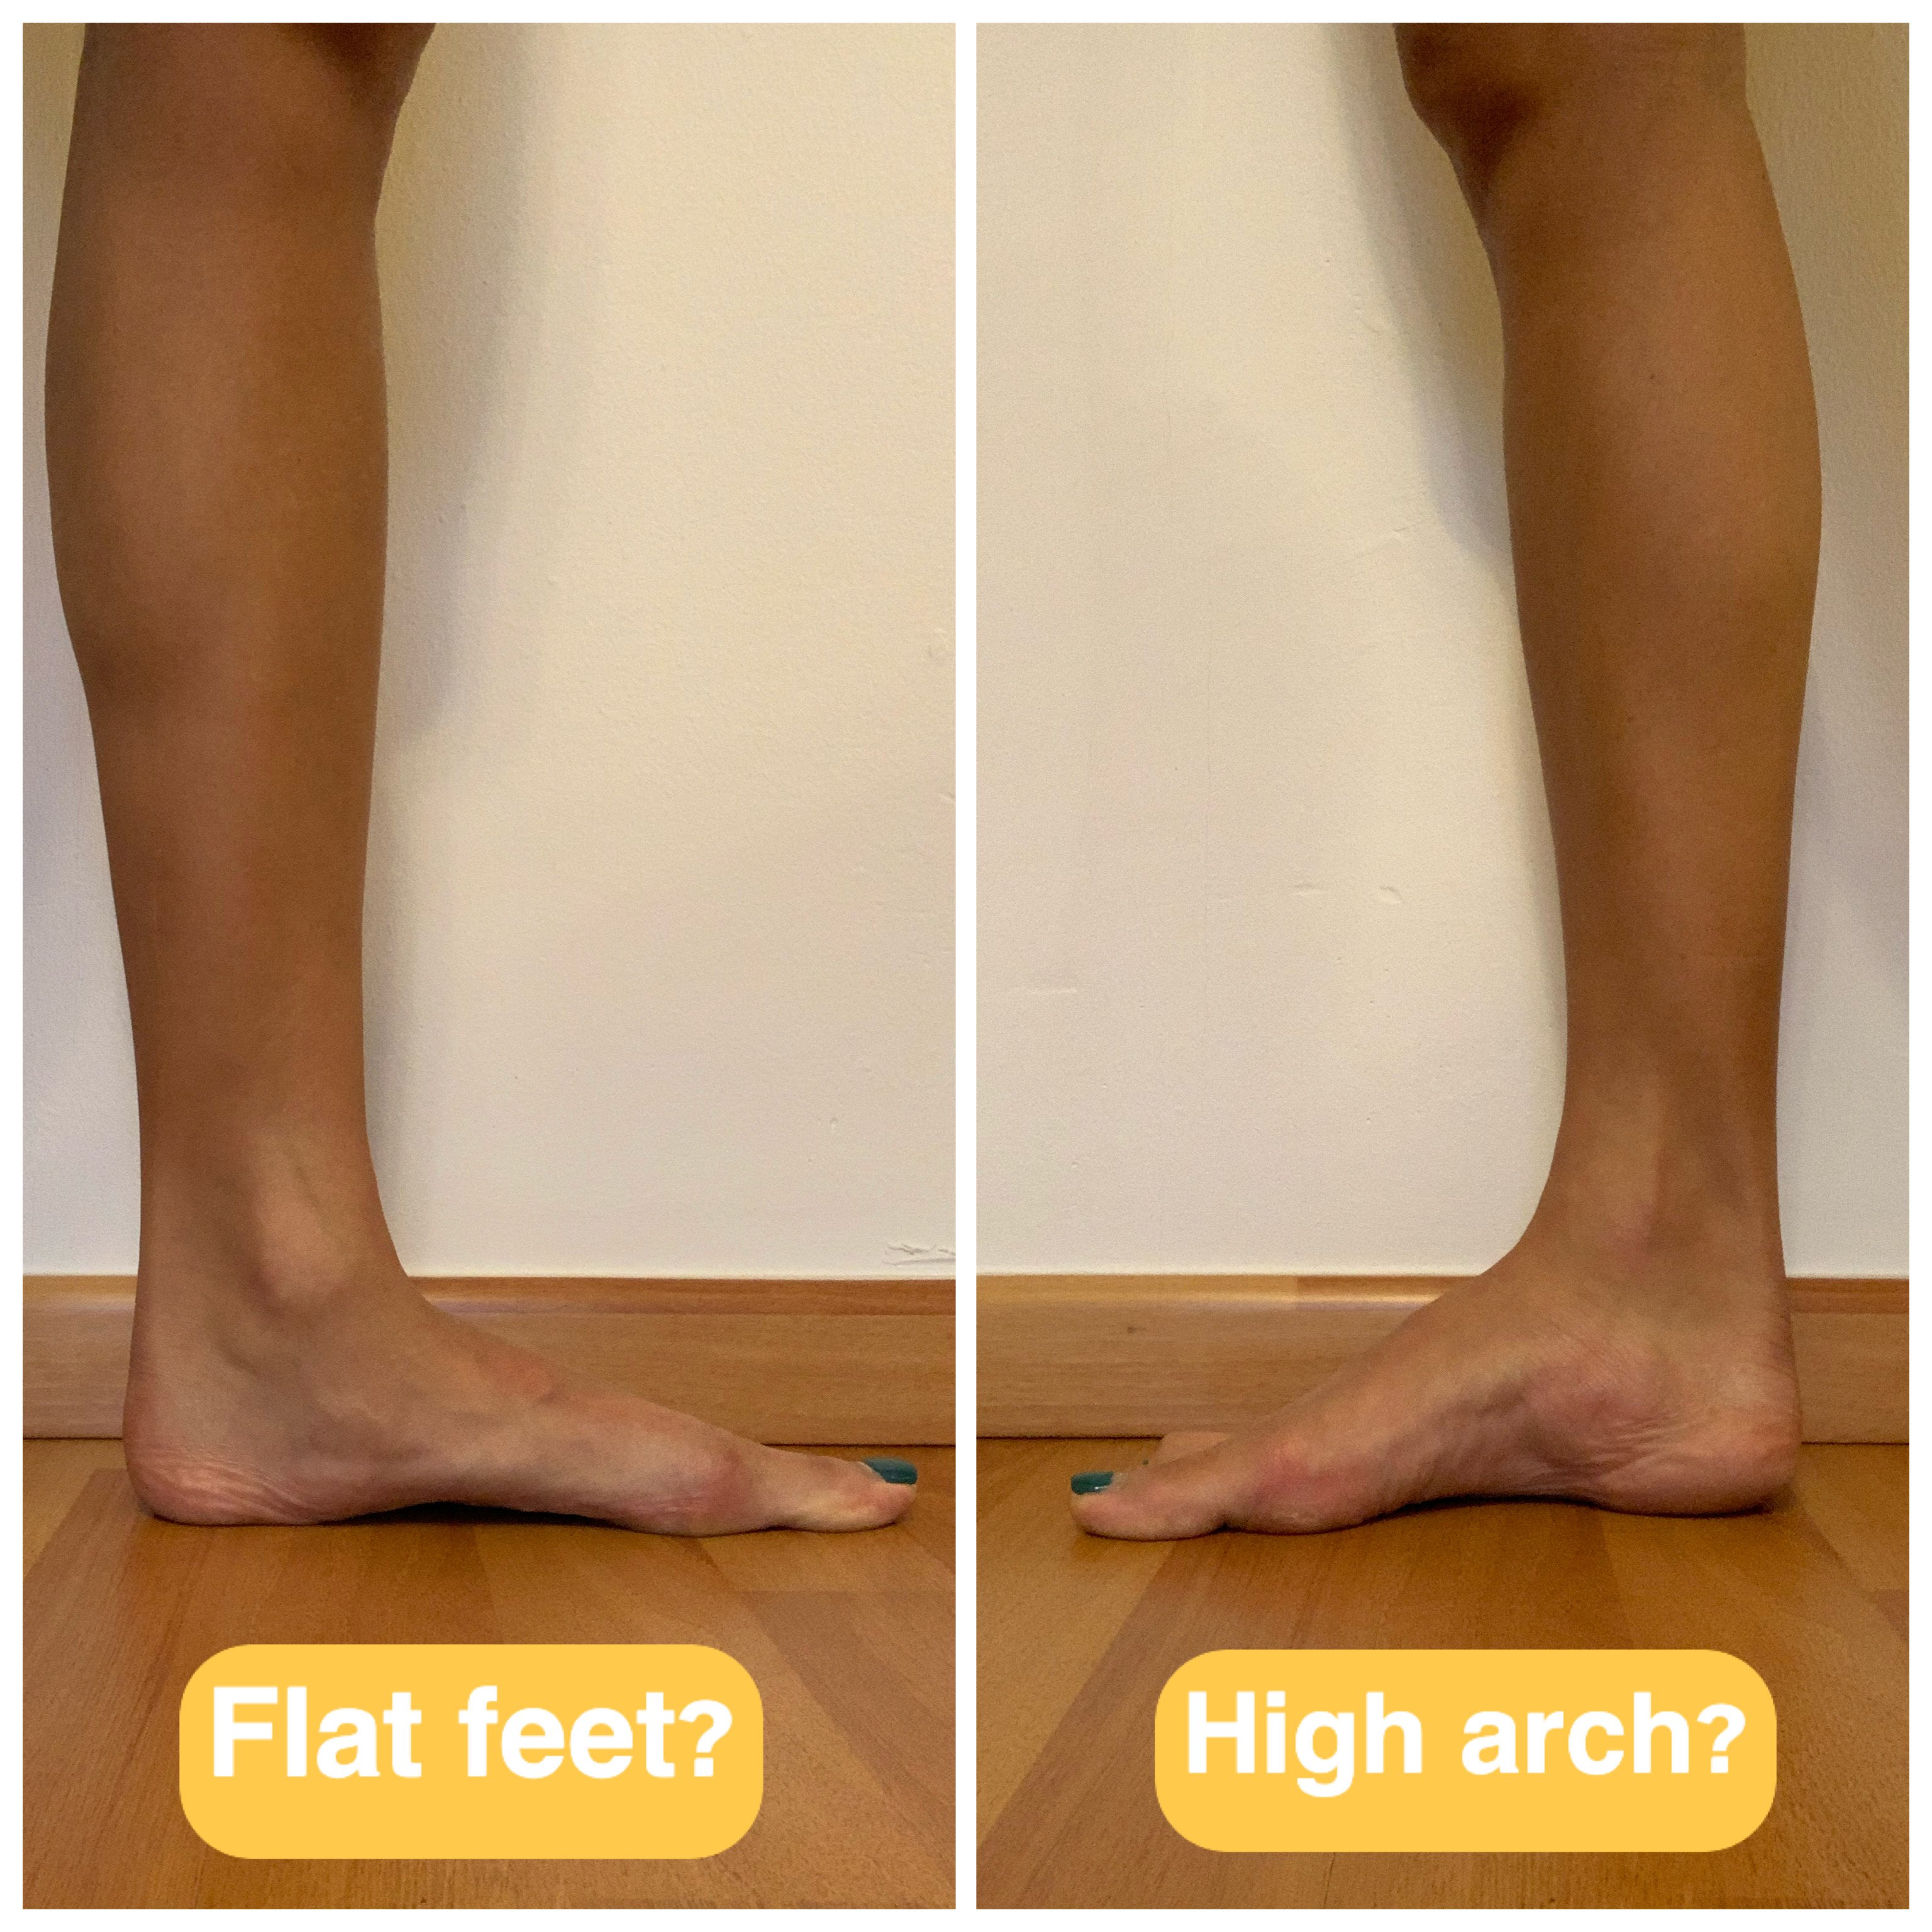 Flat Feet and High Arches: What do they mean?